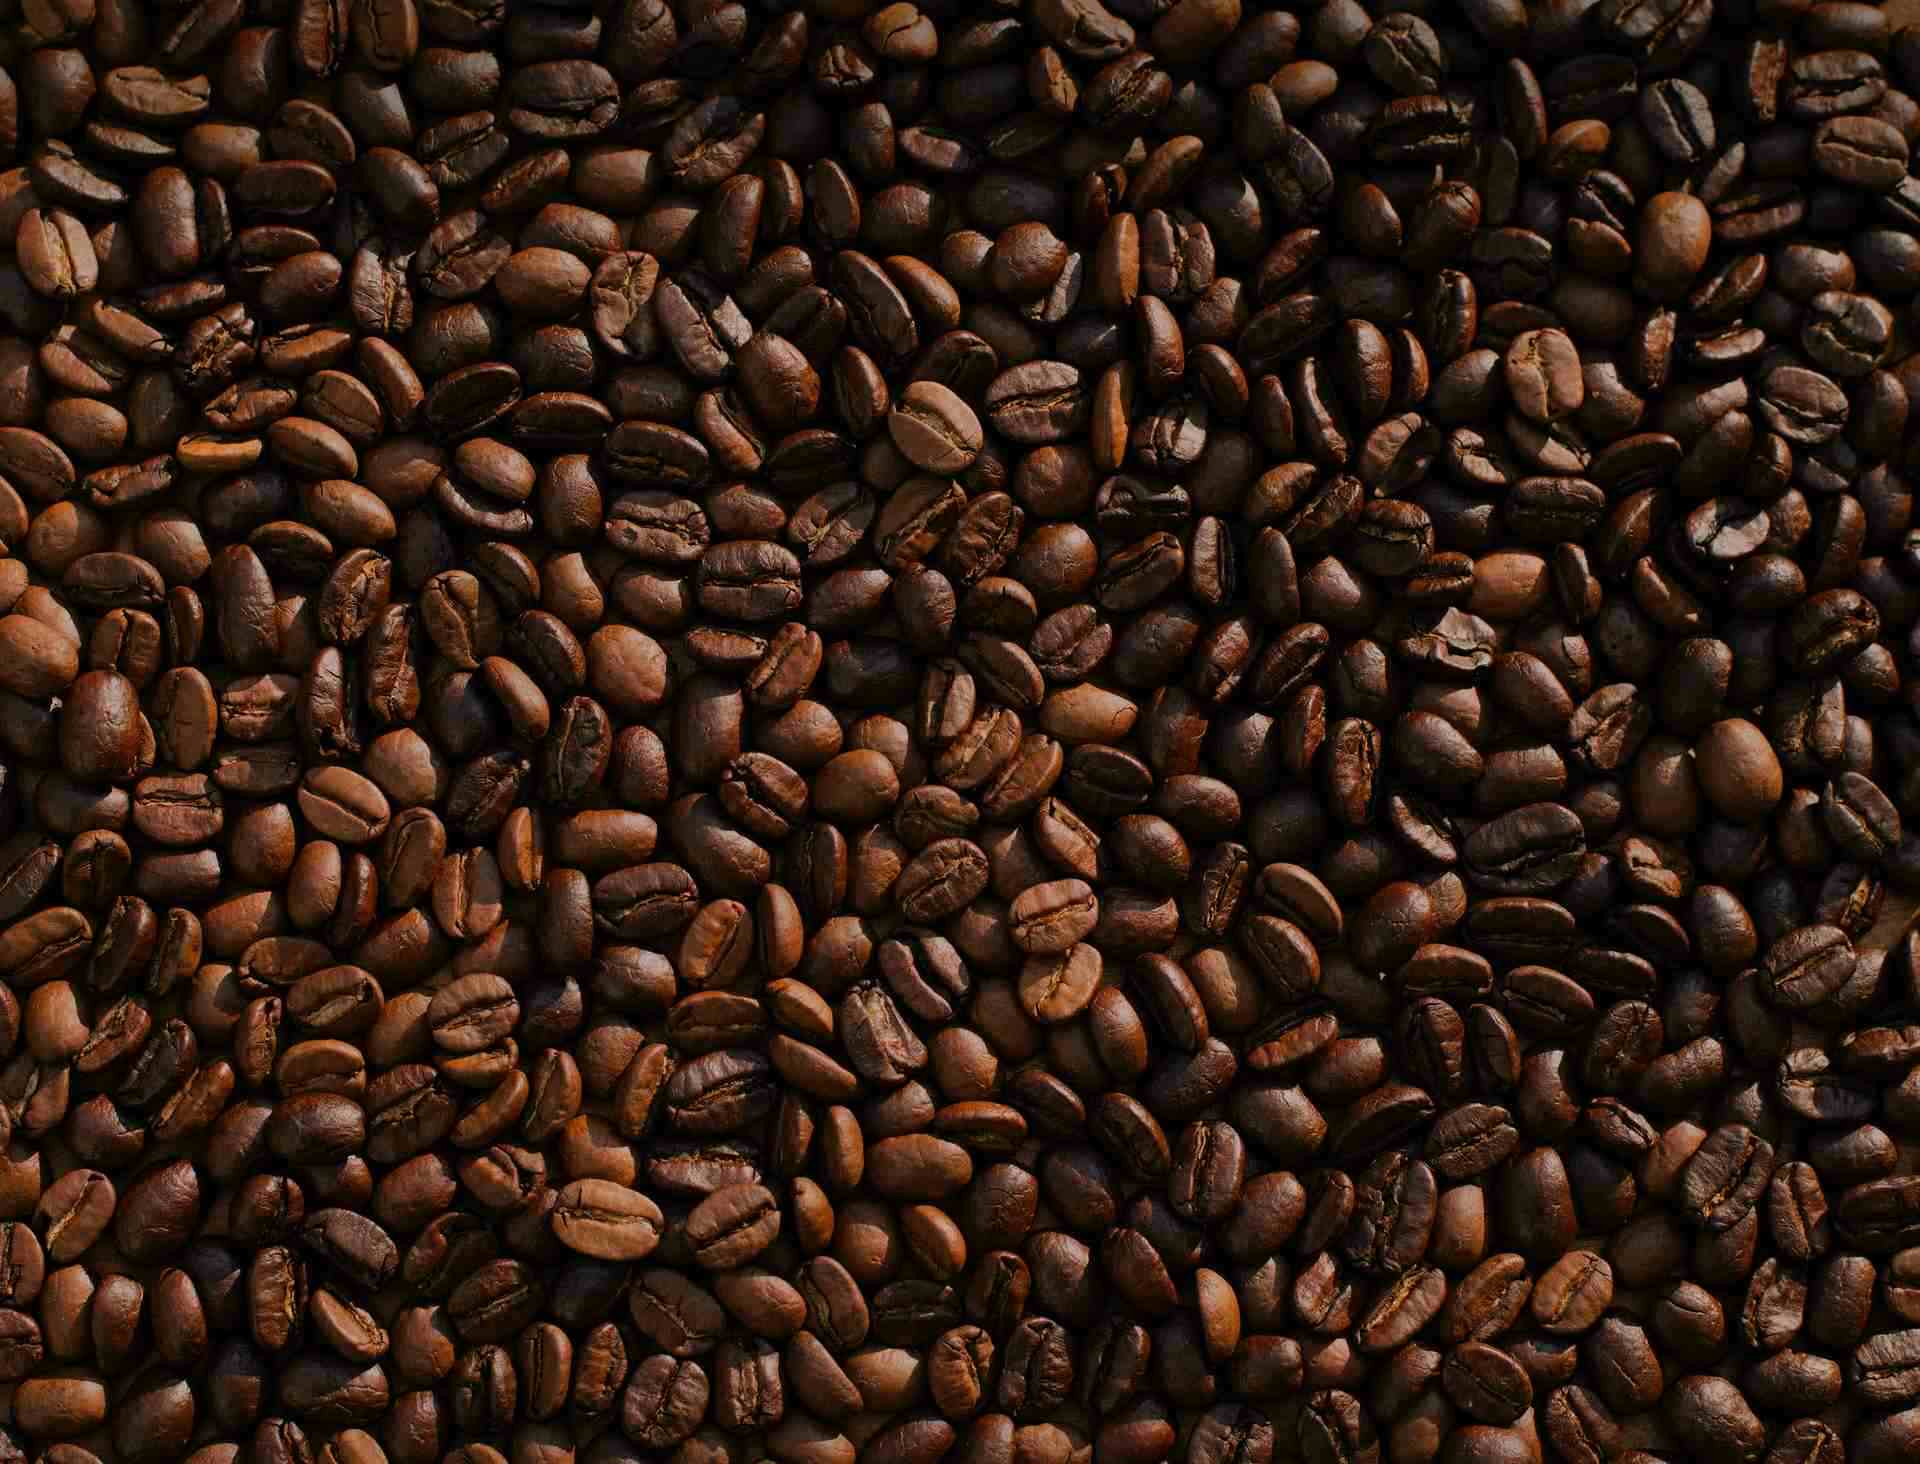 What foods can cats not eat - caffeine - picture of coffee beans.